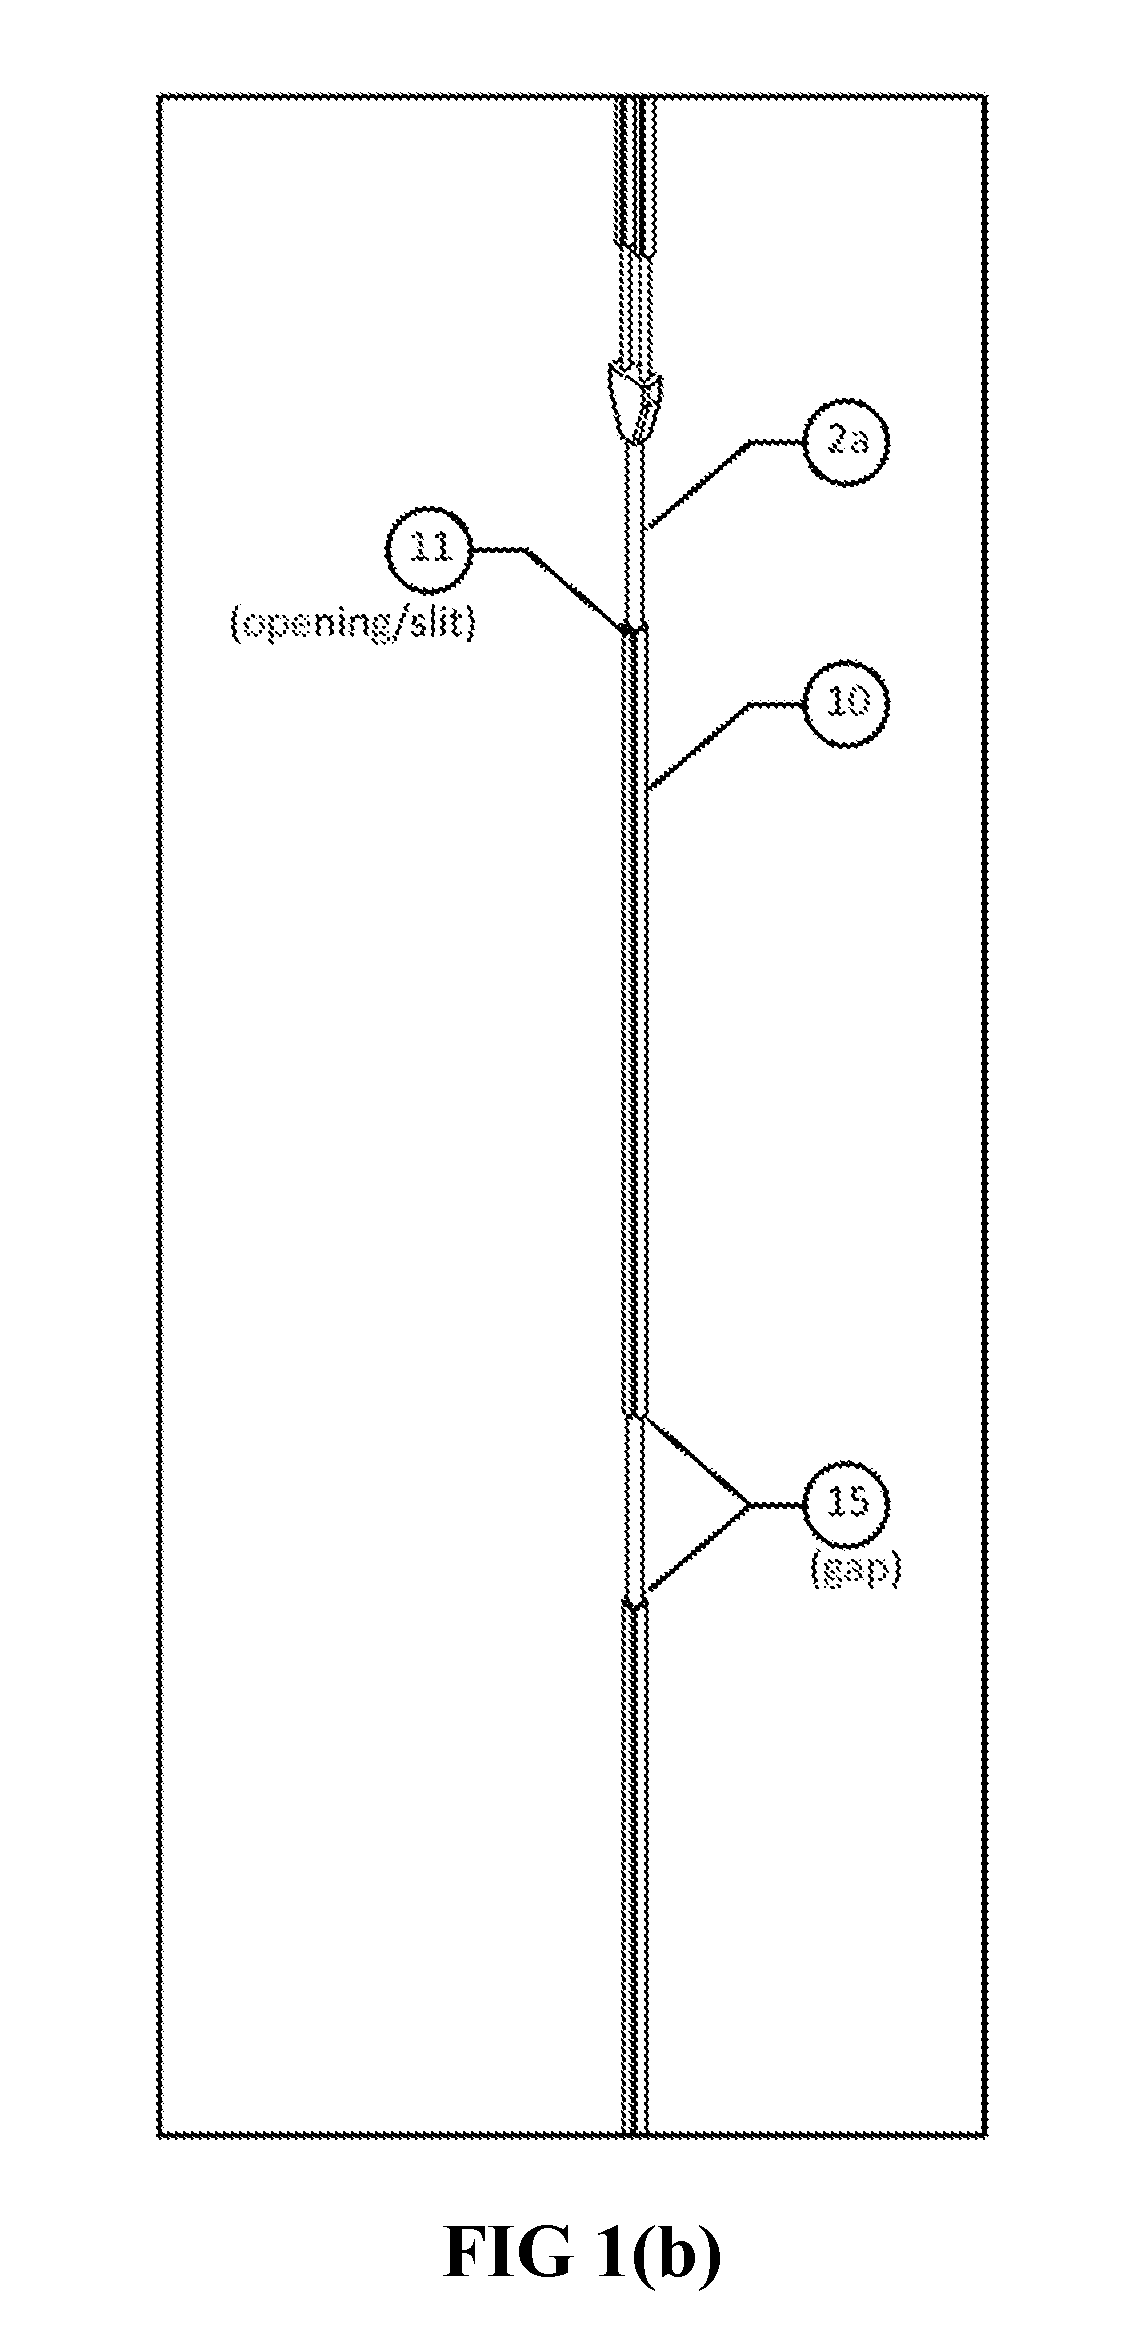 Cord management device and method